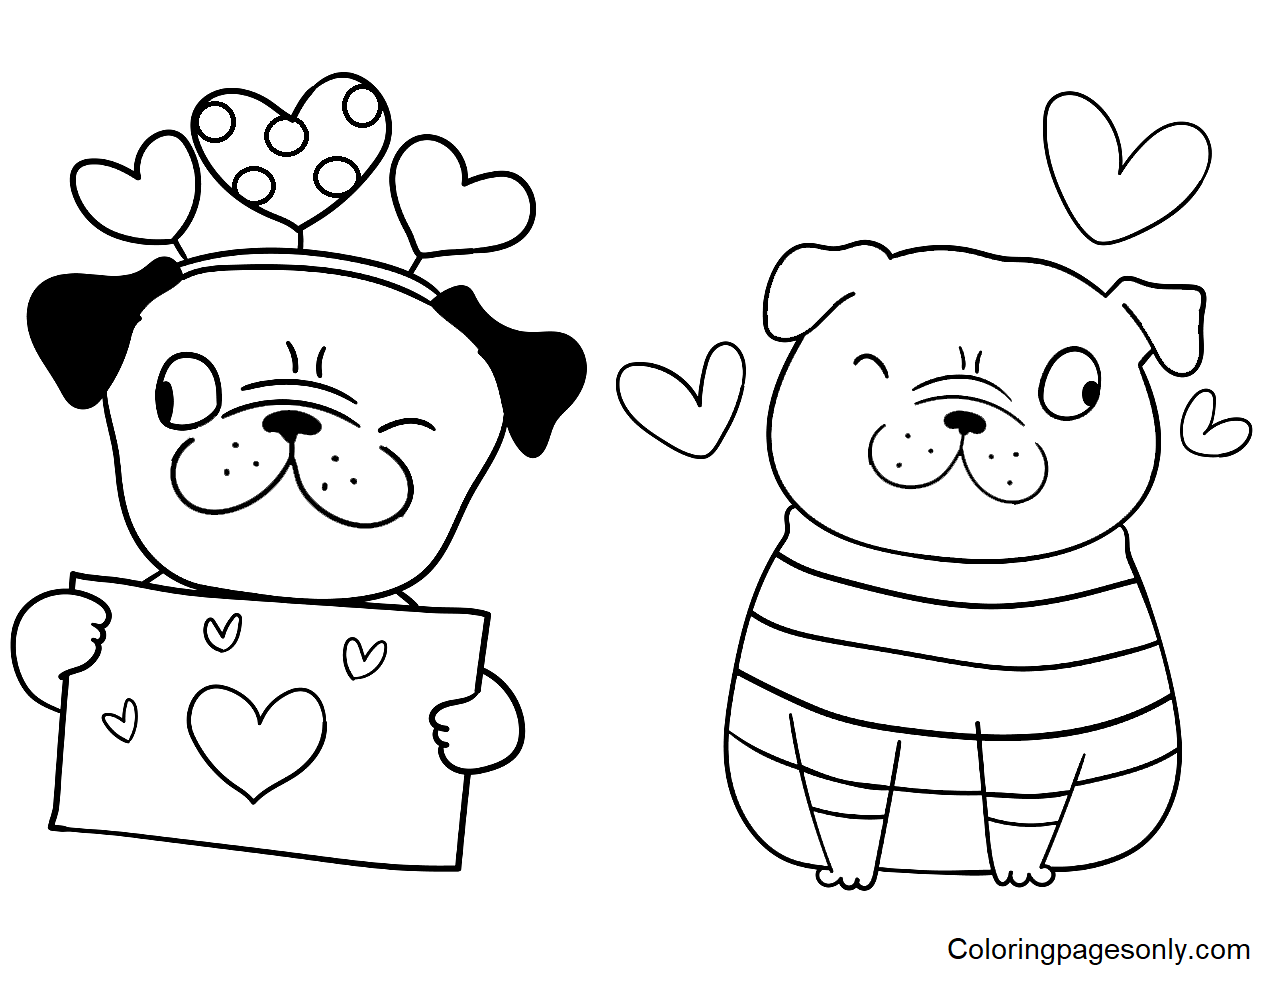 Cute Pug Dog Sticker Coloring Pages